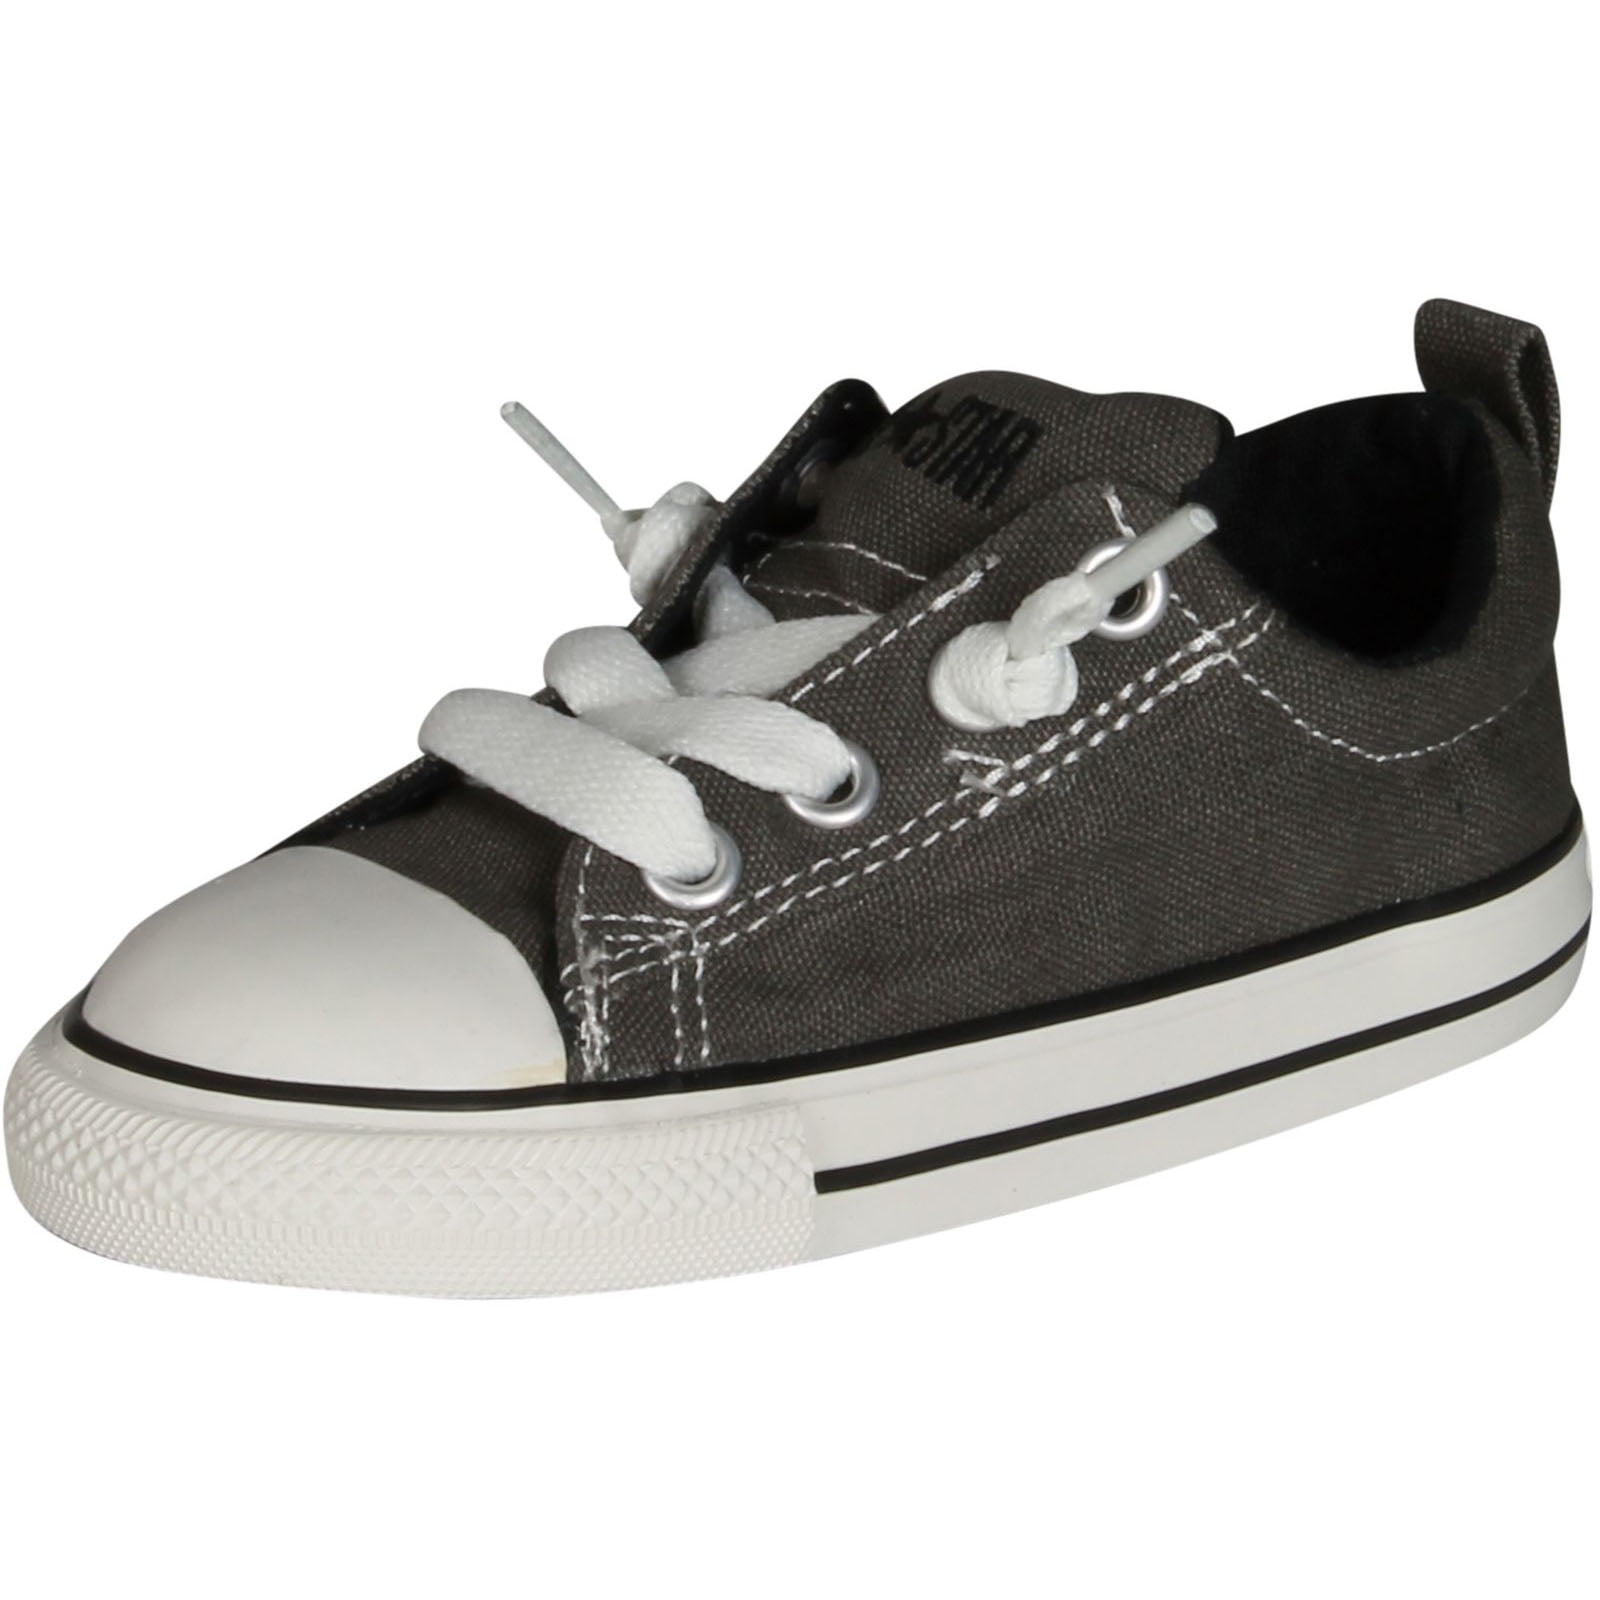 Converse Infant Chuck Taylor Street Ox, Charcoal, 6 -